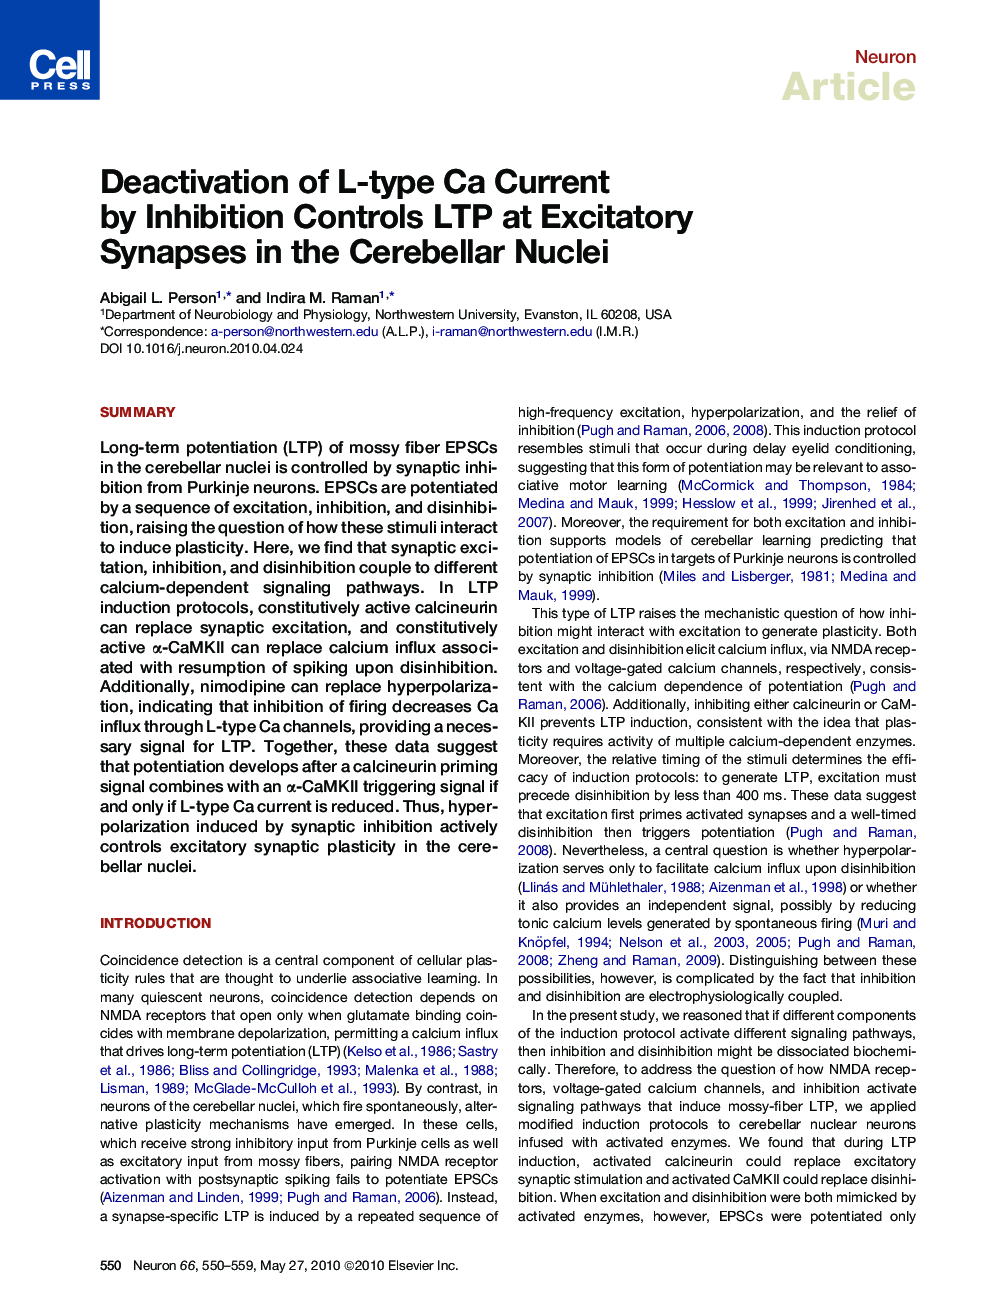 Deactivation of L-type Ca Current by Inhibition Controls LTP at Excitatory Synapses in the Cerebellar Nuclei